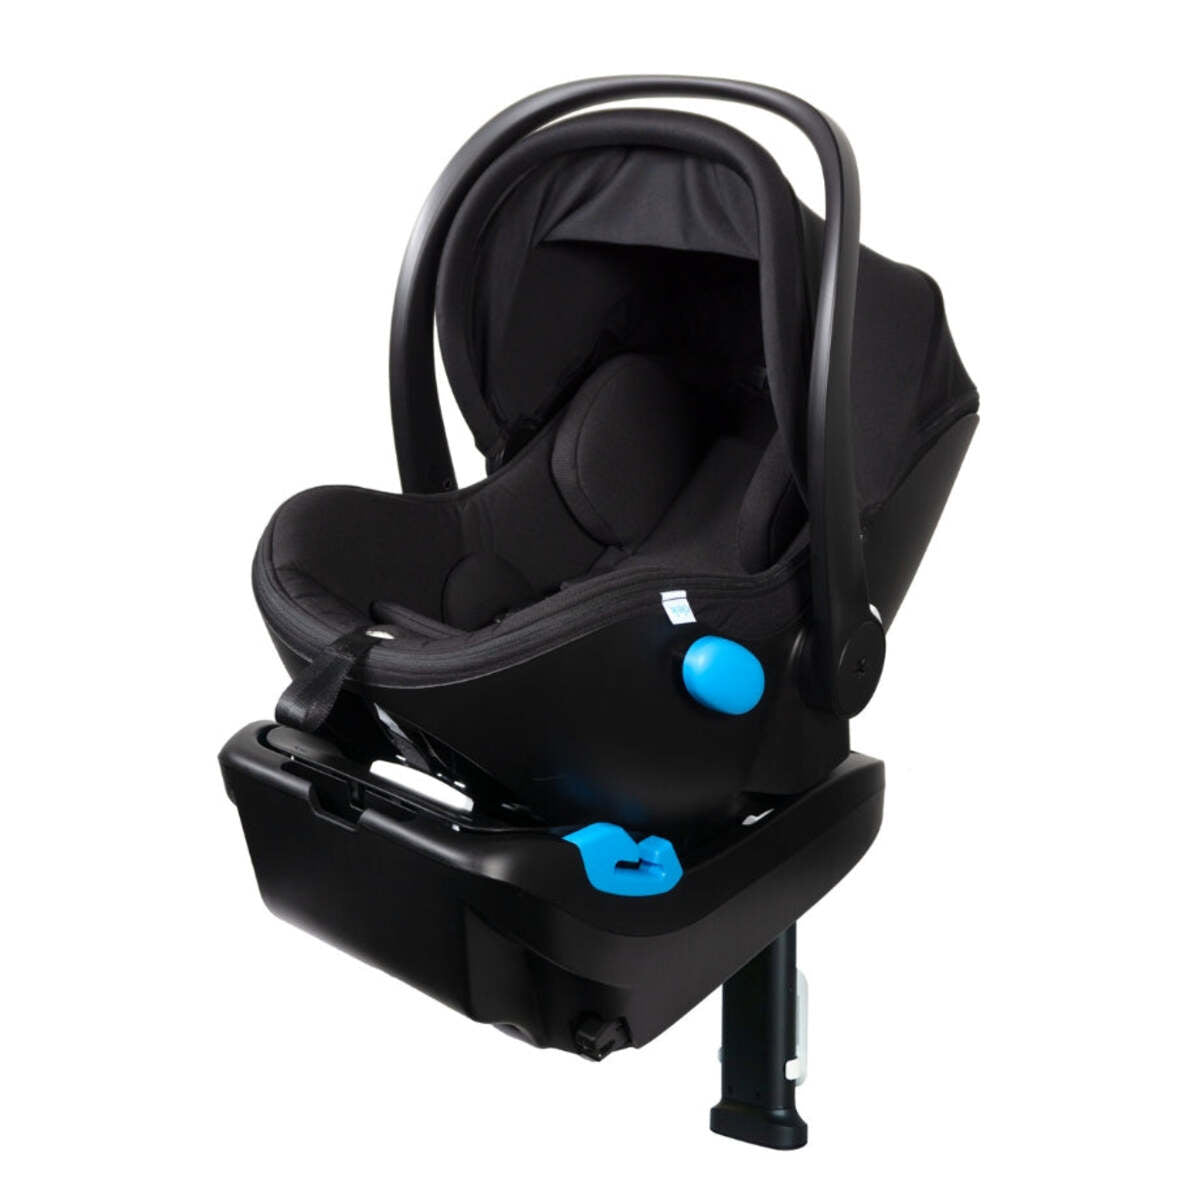 Clek Liing Infant Car Seat with Matching Insert, 826783014313 - ANB Baby